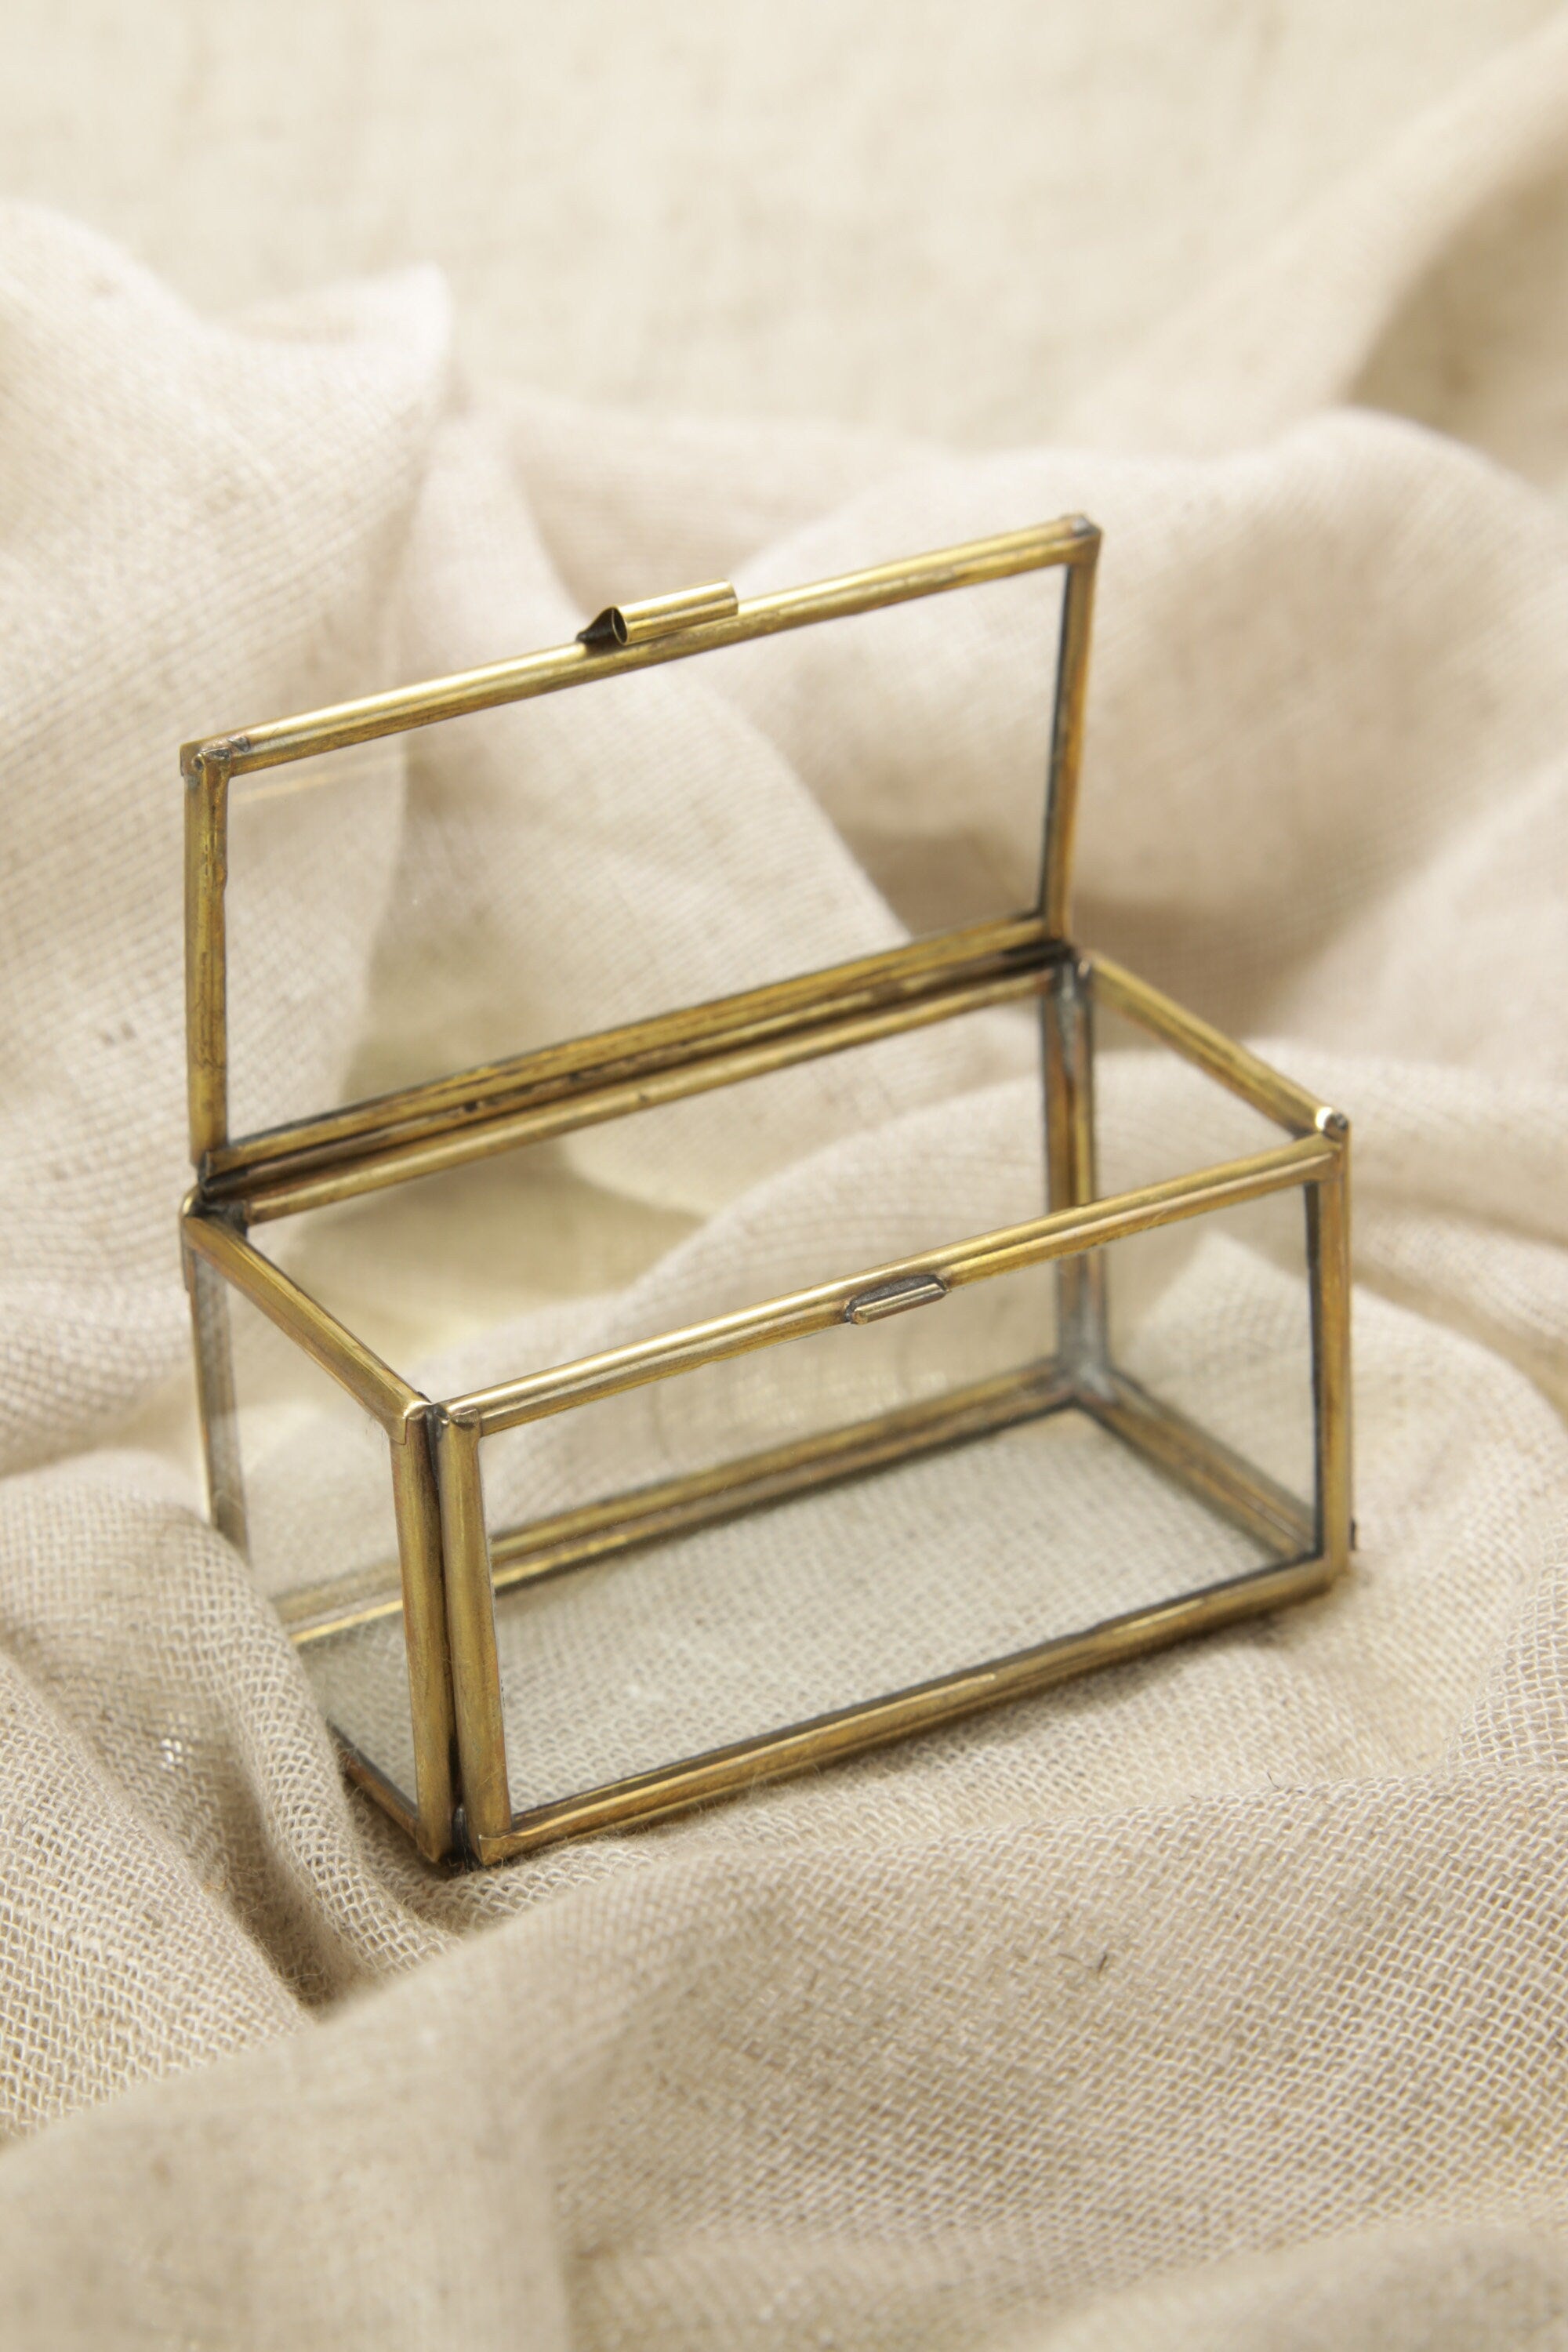 Handcrafted Elegance: Large Rectangular Premium Gem Display Box with Gold-Toned Brass Finish - Perfect for Jewelry & Gem Presentation